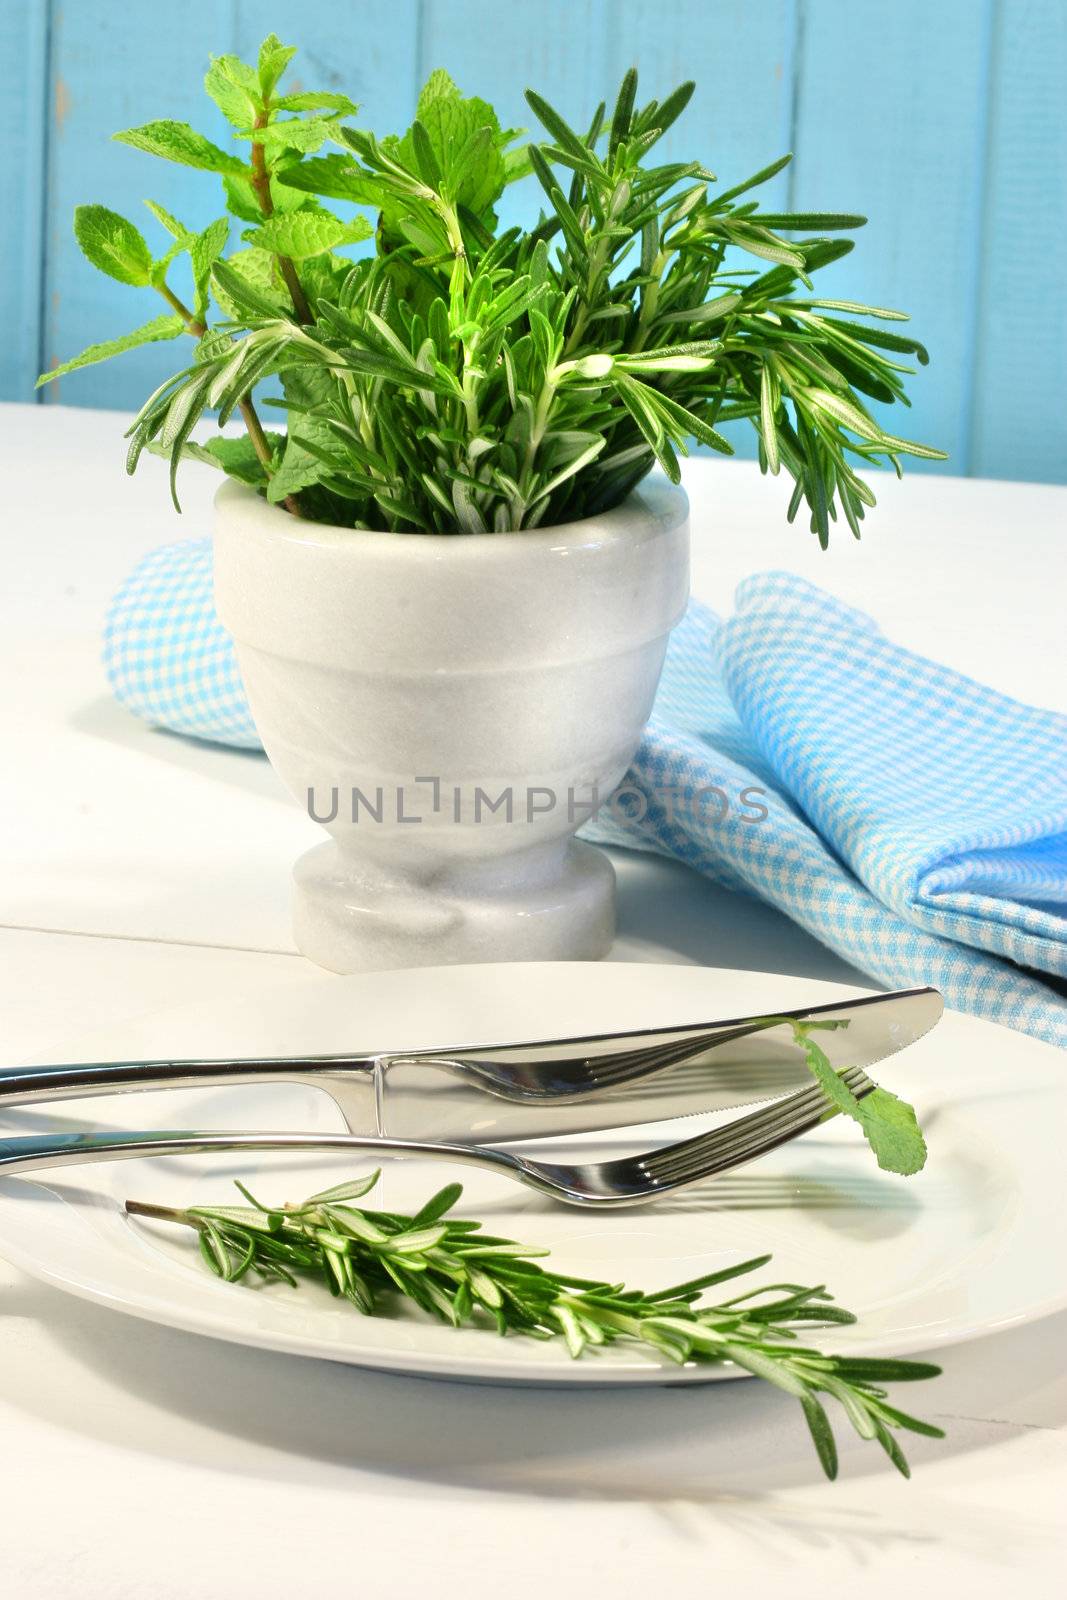 Fresh green herbs on a table by Sandralise